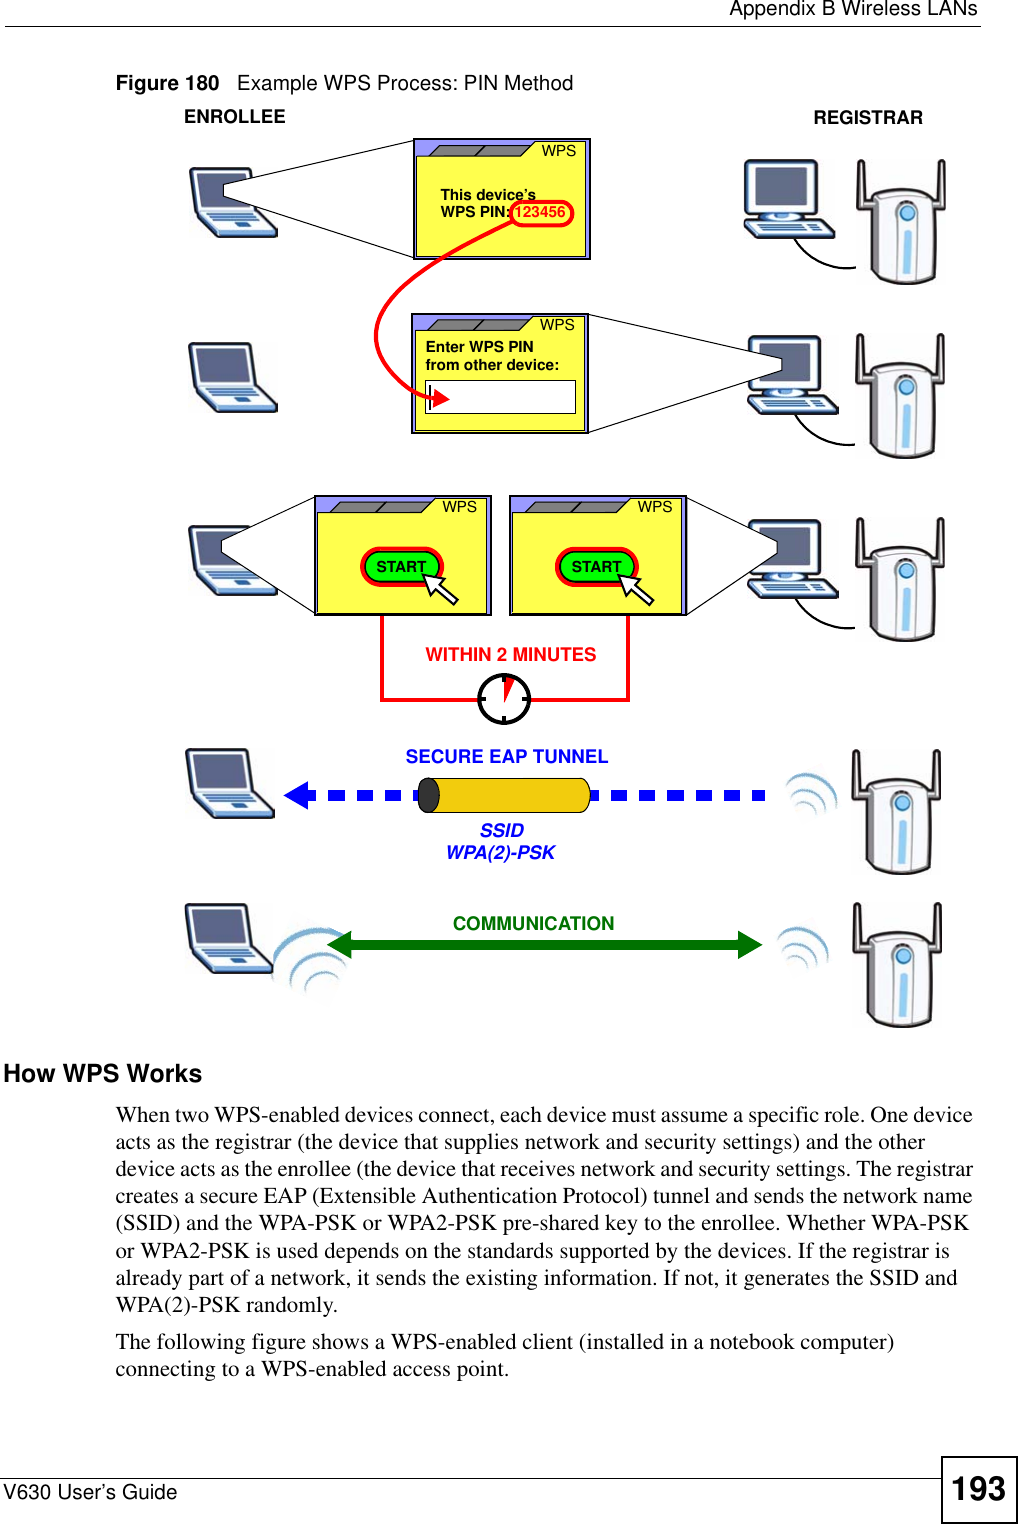  Appendix B Wireless LANsV630 User’s Guide 193Figure 180   Example WPS Process: PIN MethodHow WPS WorksWhen two WPS-enabled devices connect, each device must assume a specific role. One device acts as the registrar (the device that supplies network and security settings) and the other device acts as the enrollee (the device that receives network and security settings. The registrar creates a secure EAP (Extensible Authentication Protocol) tunnel and sends the network name (SSID) and the WPA-PSK or WPA2-PSK pre-shared key to the enrollee. Whether WPA-PSK or WPA2-PSK is used depends on the standards supported by the devices. If the registrar is already part of a network, it sends the existing information. If not, it generates the SSID and WPA(2)-PSK randomly.The following figure shows a WPS-enabled client (installed in a notebook computer) connecting to a WPS-enabled access point.ENROLLEESECURE EAP TUNNELSSIDWPA(2)-PSKWITHIN 2 MINUTESCOMMUNICATIONThis device’s WPSEnter WPS PIN  WPSfrom other device: WPS PIN: 123456WPSSTARTWPSSTARTREGISTRAR